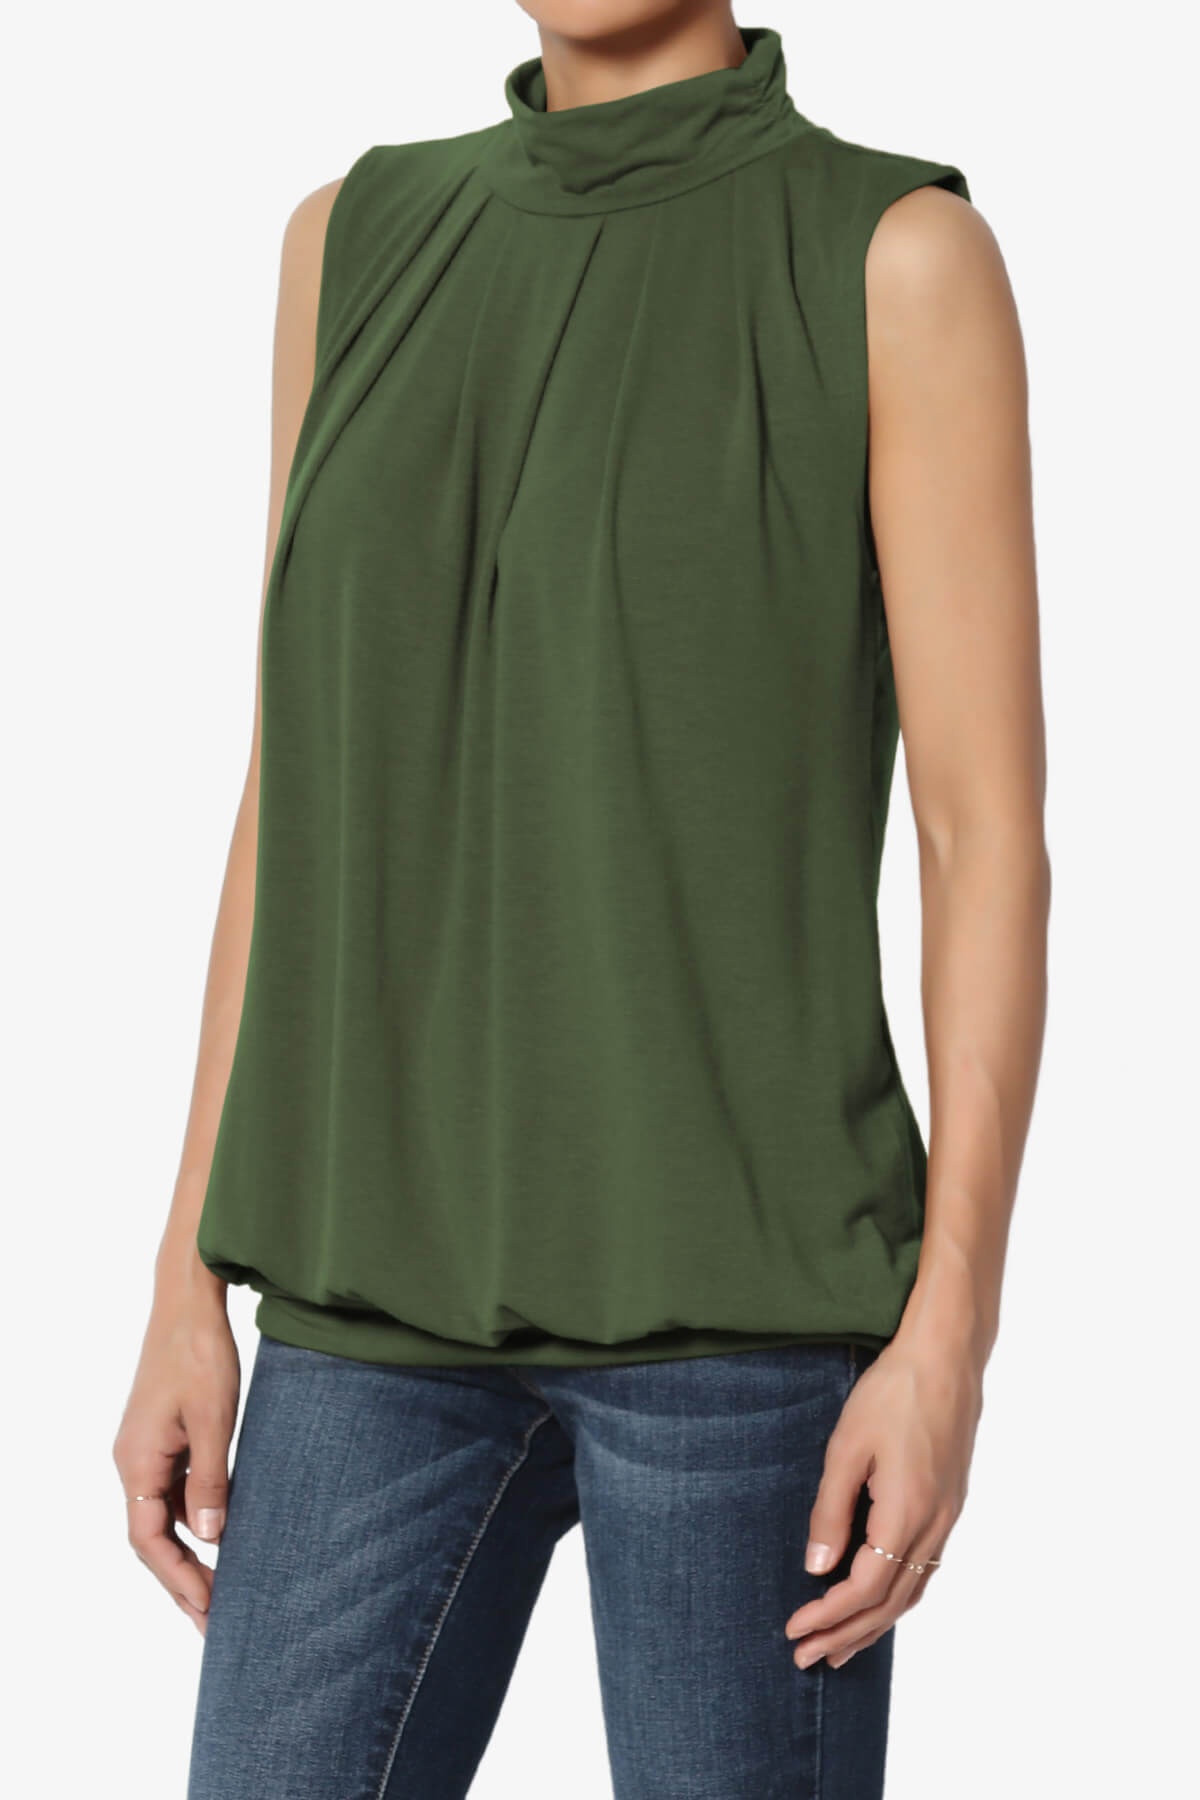 Load image into Gallery viewer, Jibbitz Sleeveless Mock Neck Pleated Top ARMY GREEN_3
